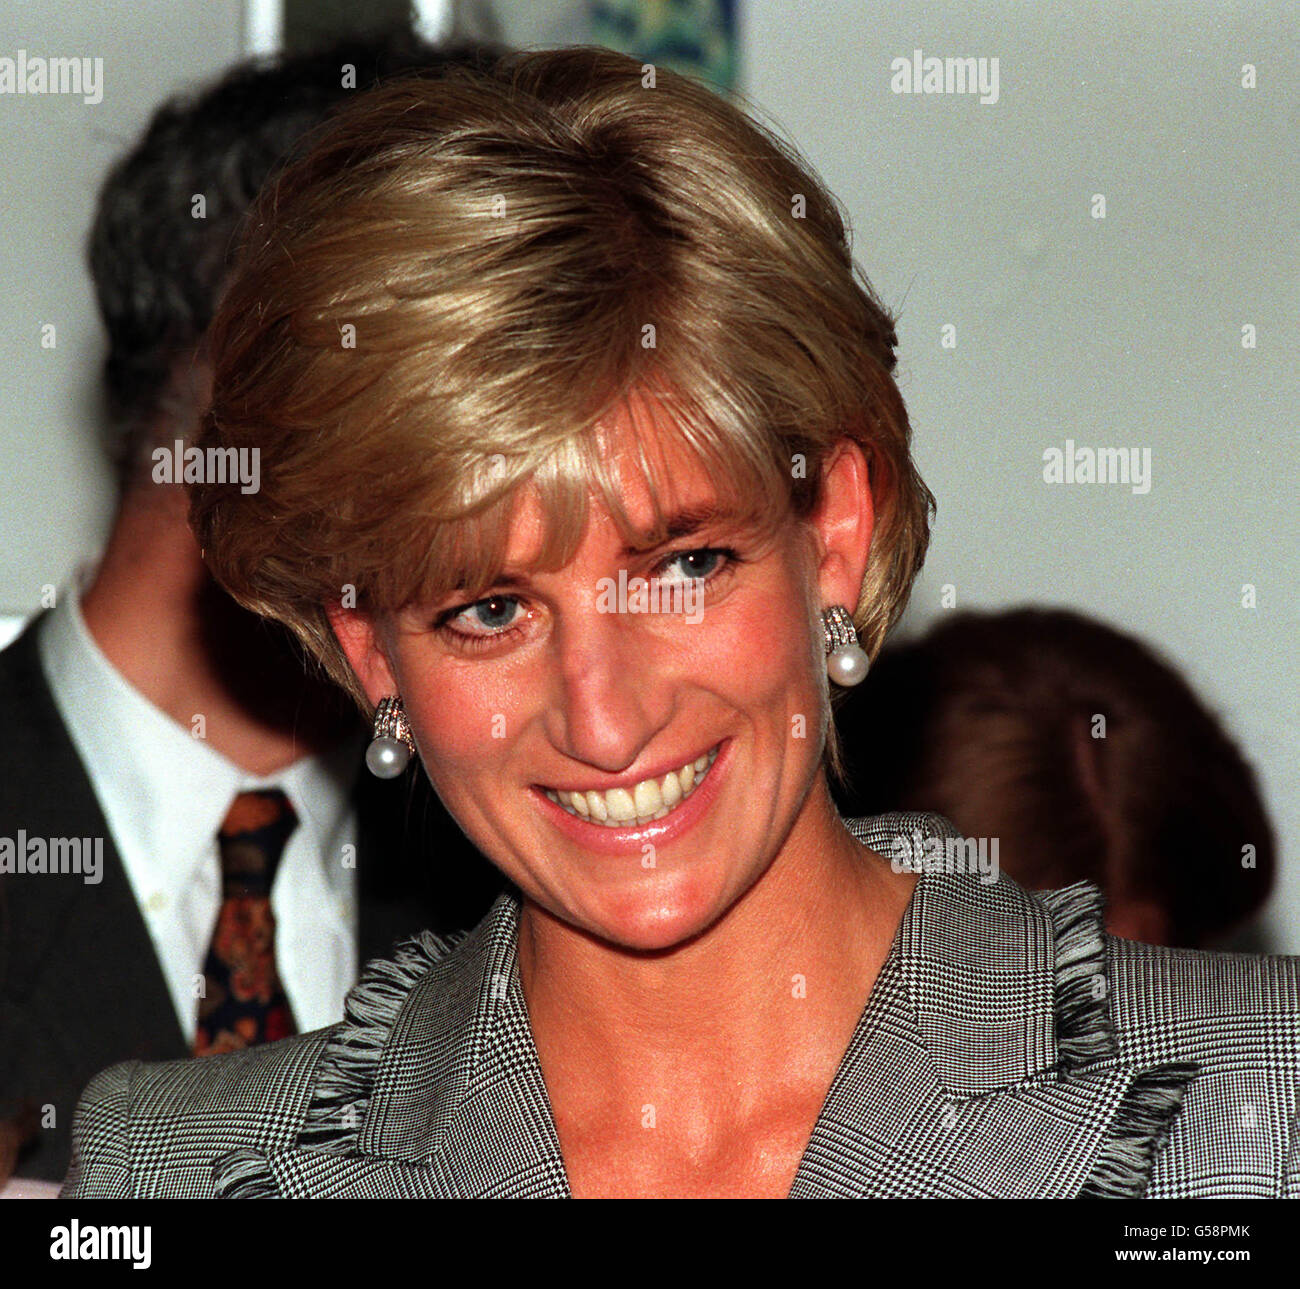 1997: Diana, Princess of Wales, smiles during her visit to St. Mary's Paediatric Hospital, London. Stock Photo